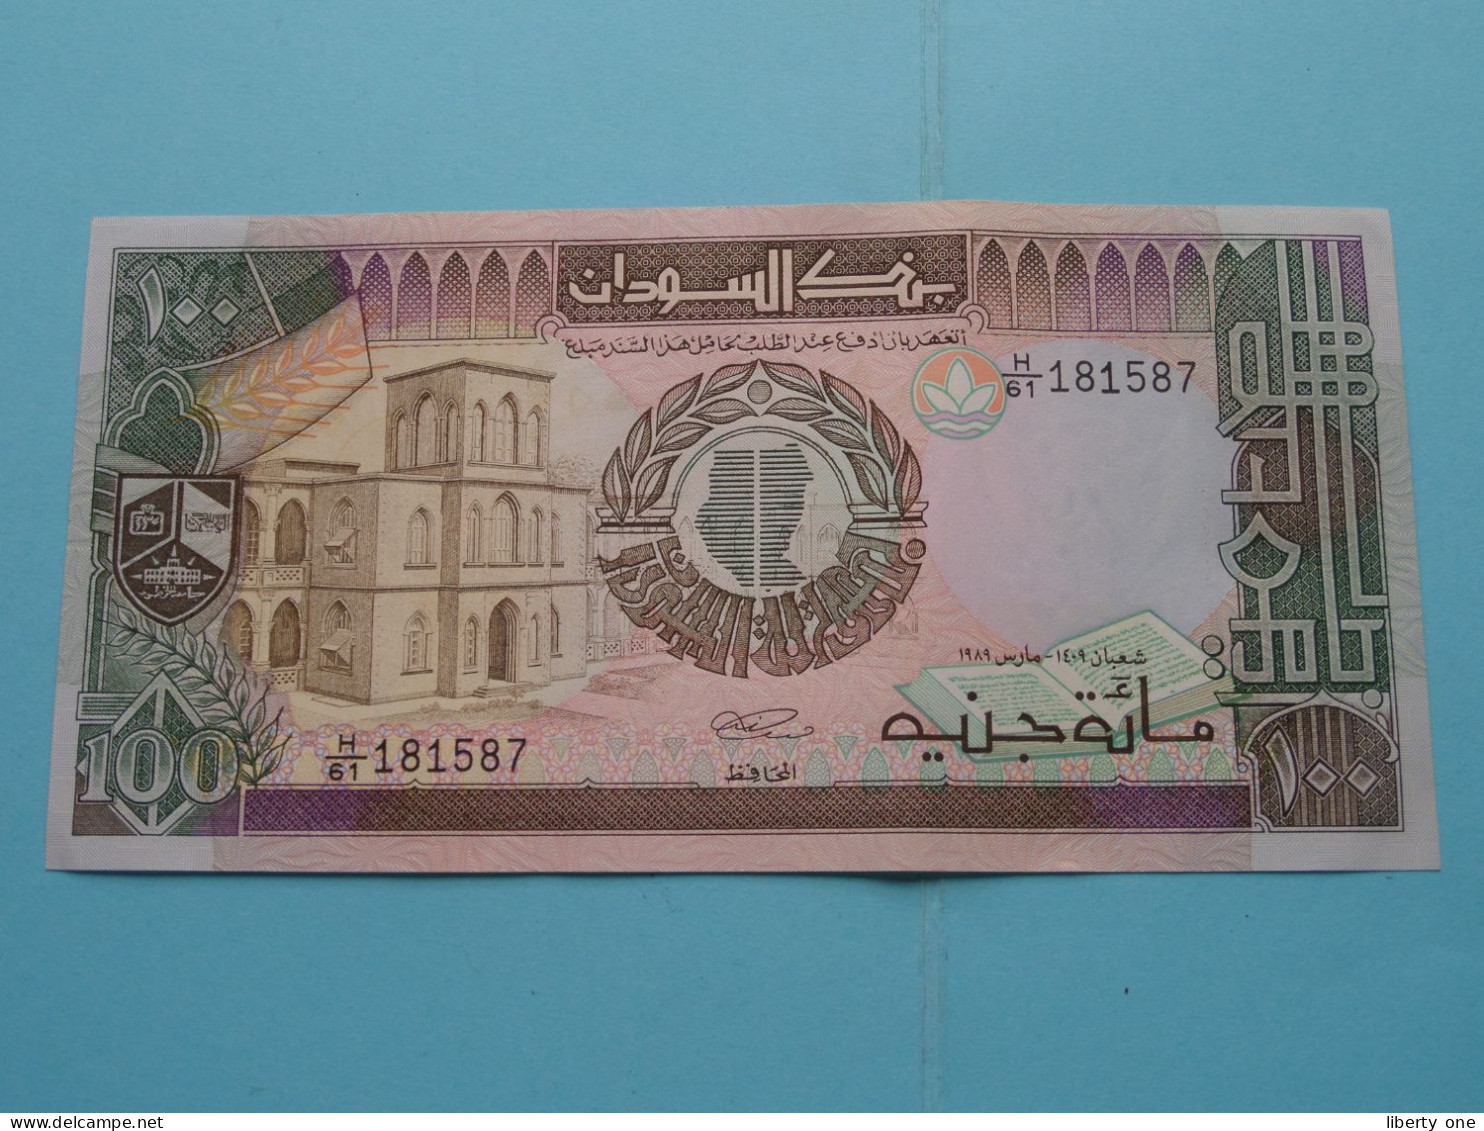 100 Sudanese Pounds ( H/61 181587 ) Bank Of SUDAN () 1989 ( For Grade See SCAN ) UNC ! - Soedan